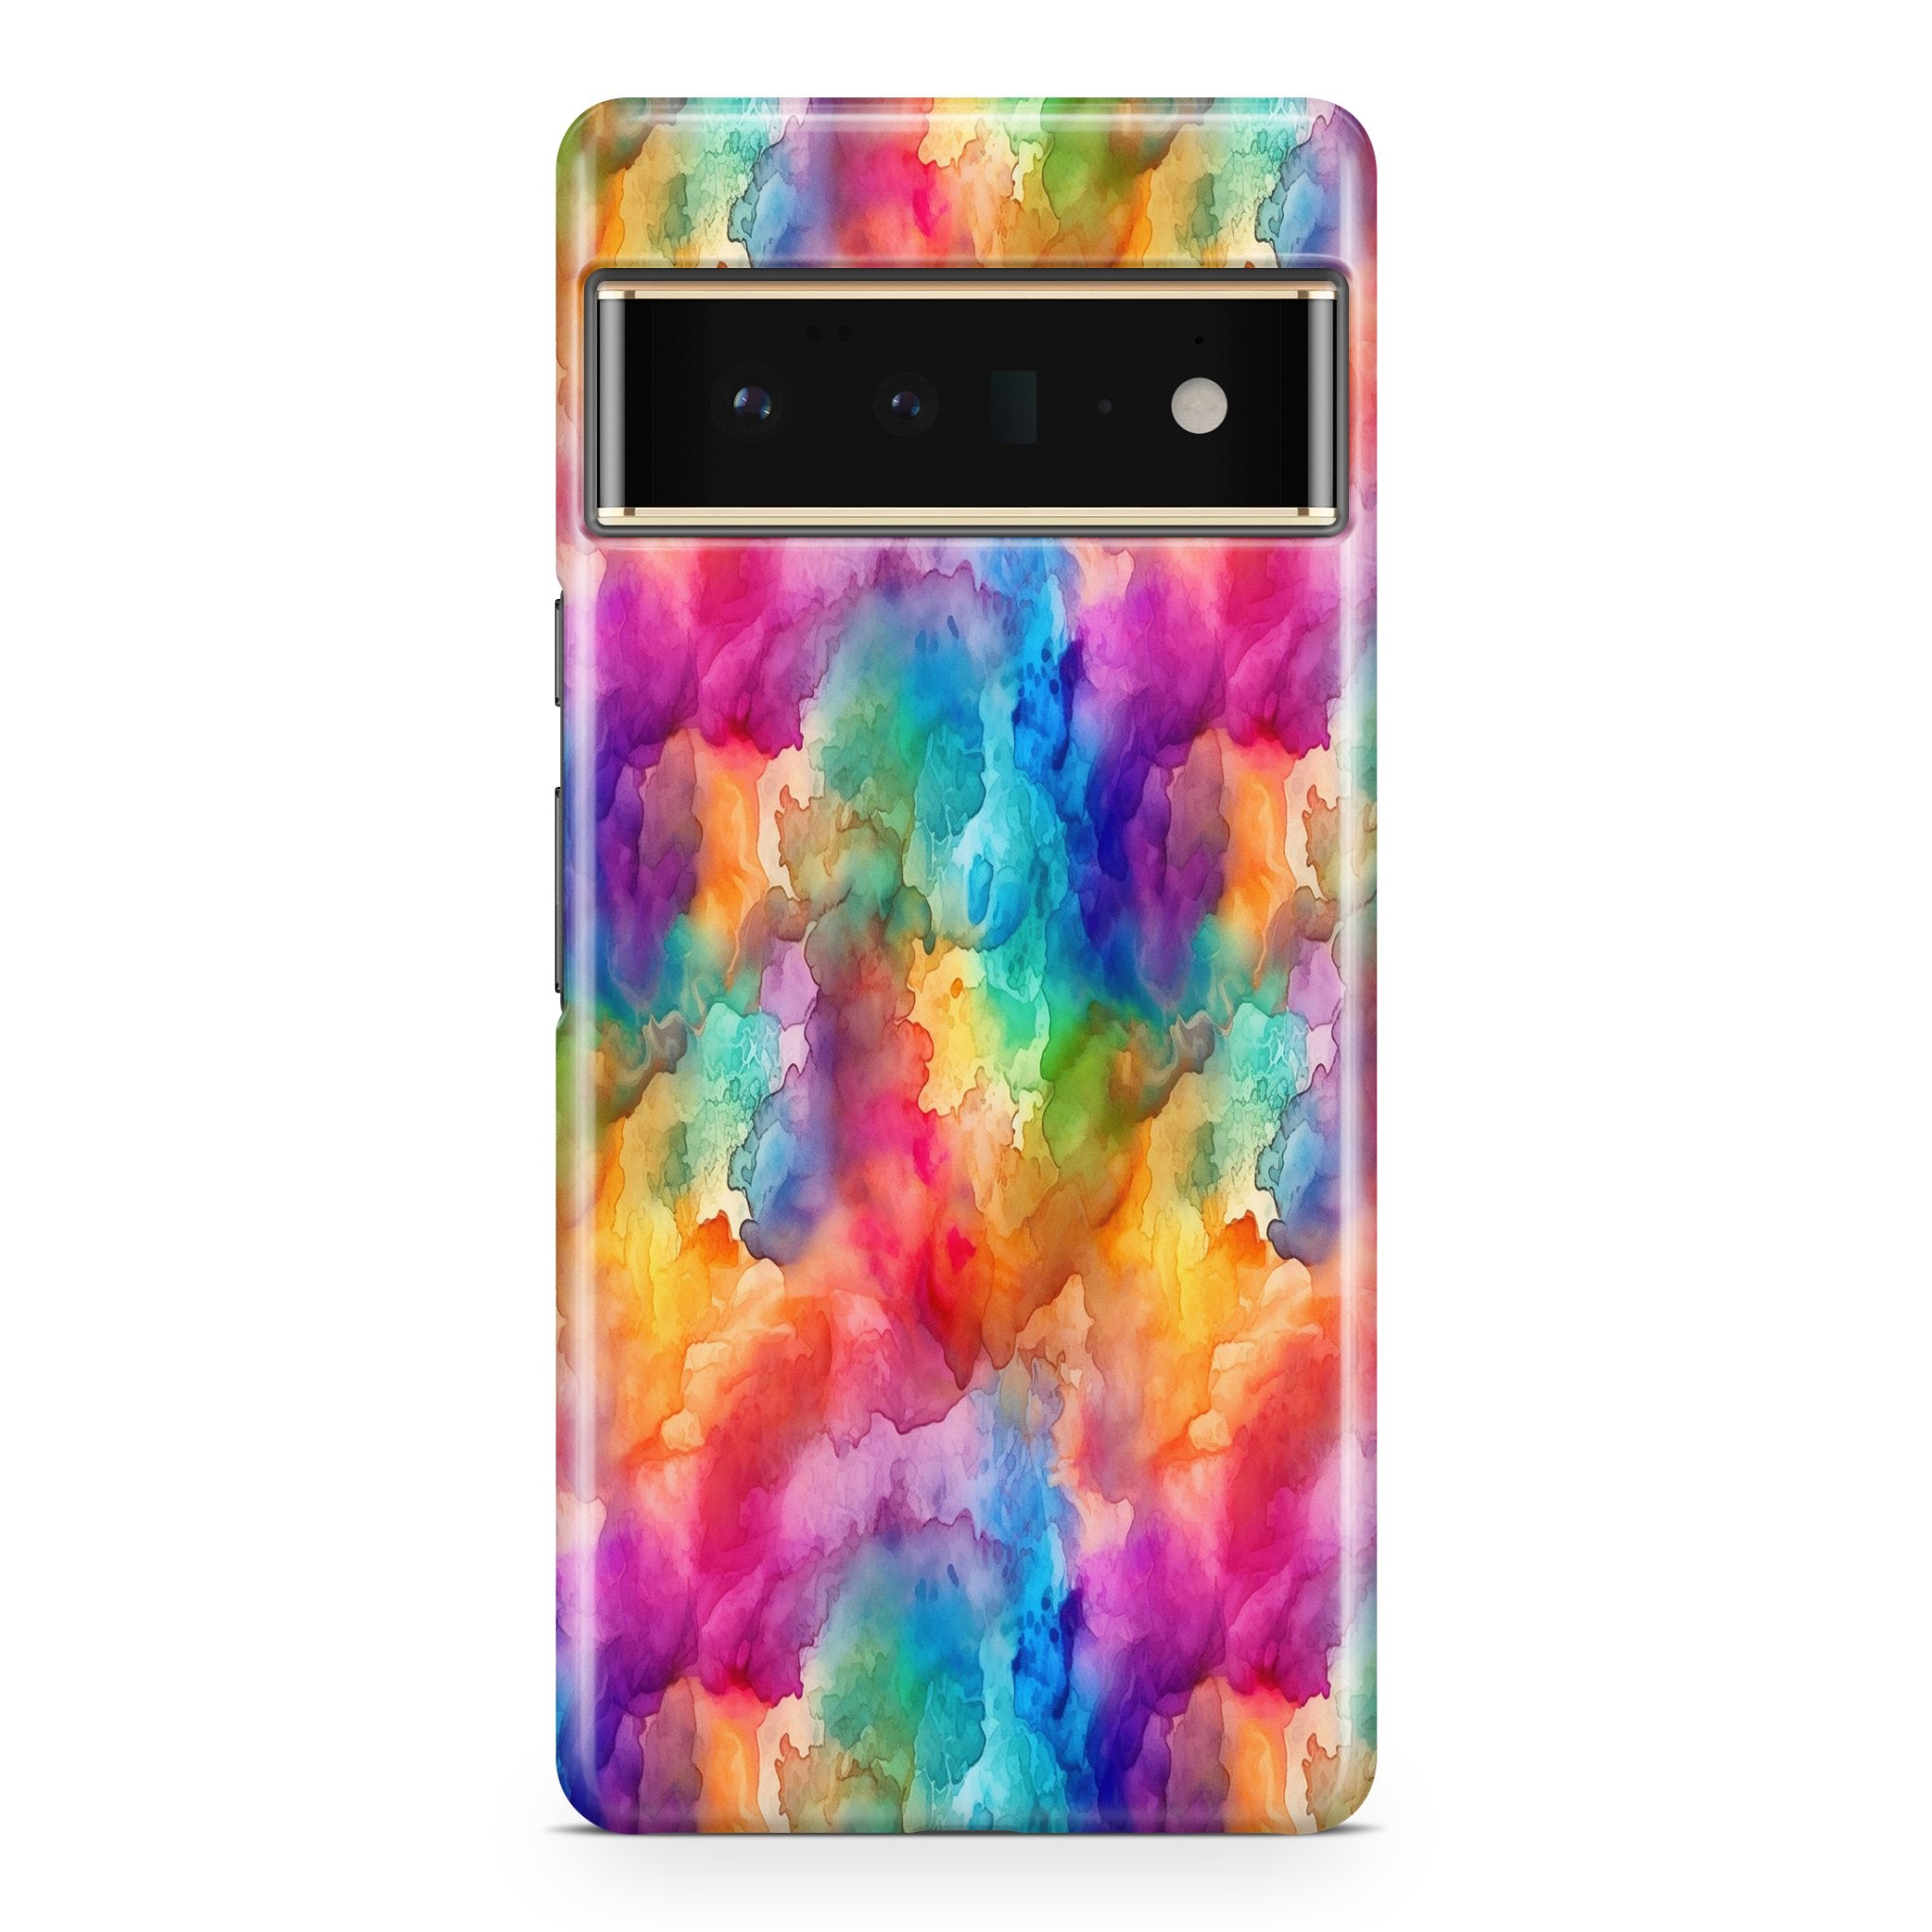 Colorful Mind - Google phone case designs by CaseSwagger